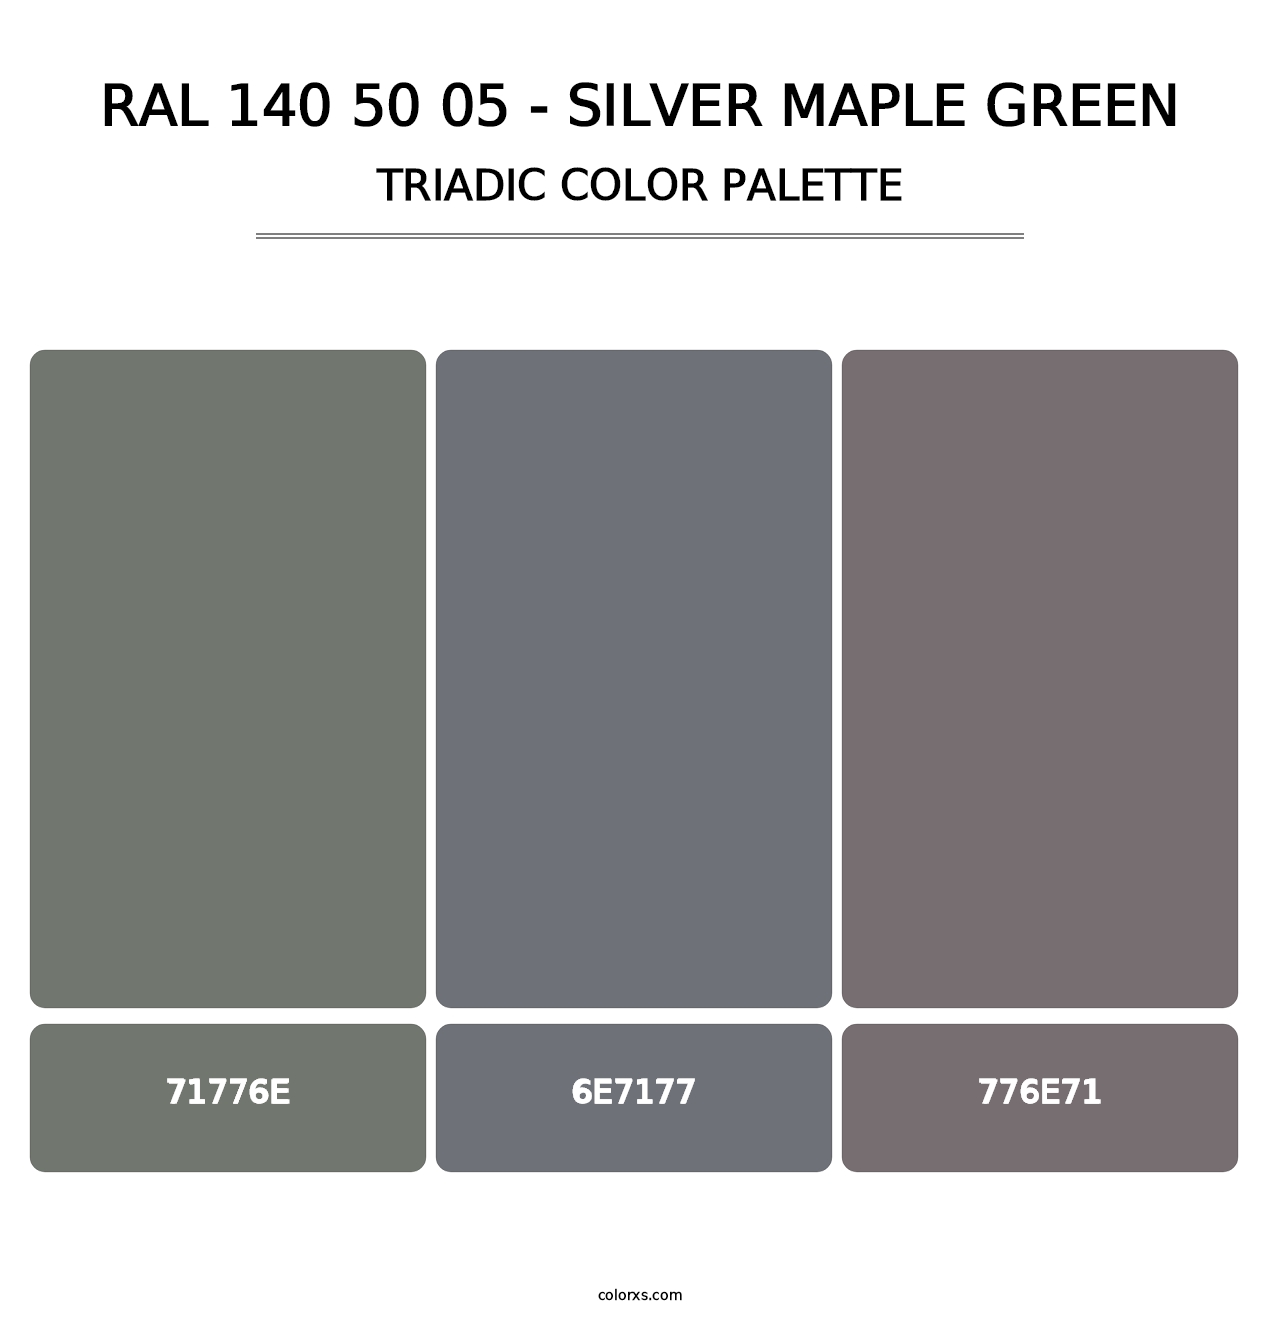 RAL 140 50 05 - Silver Maple Green - Triadic Color Palette